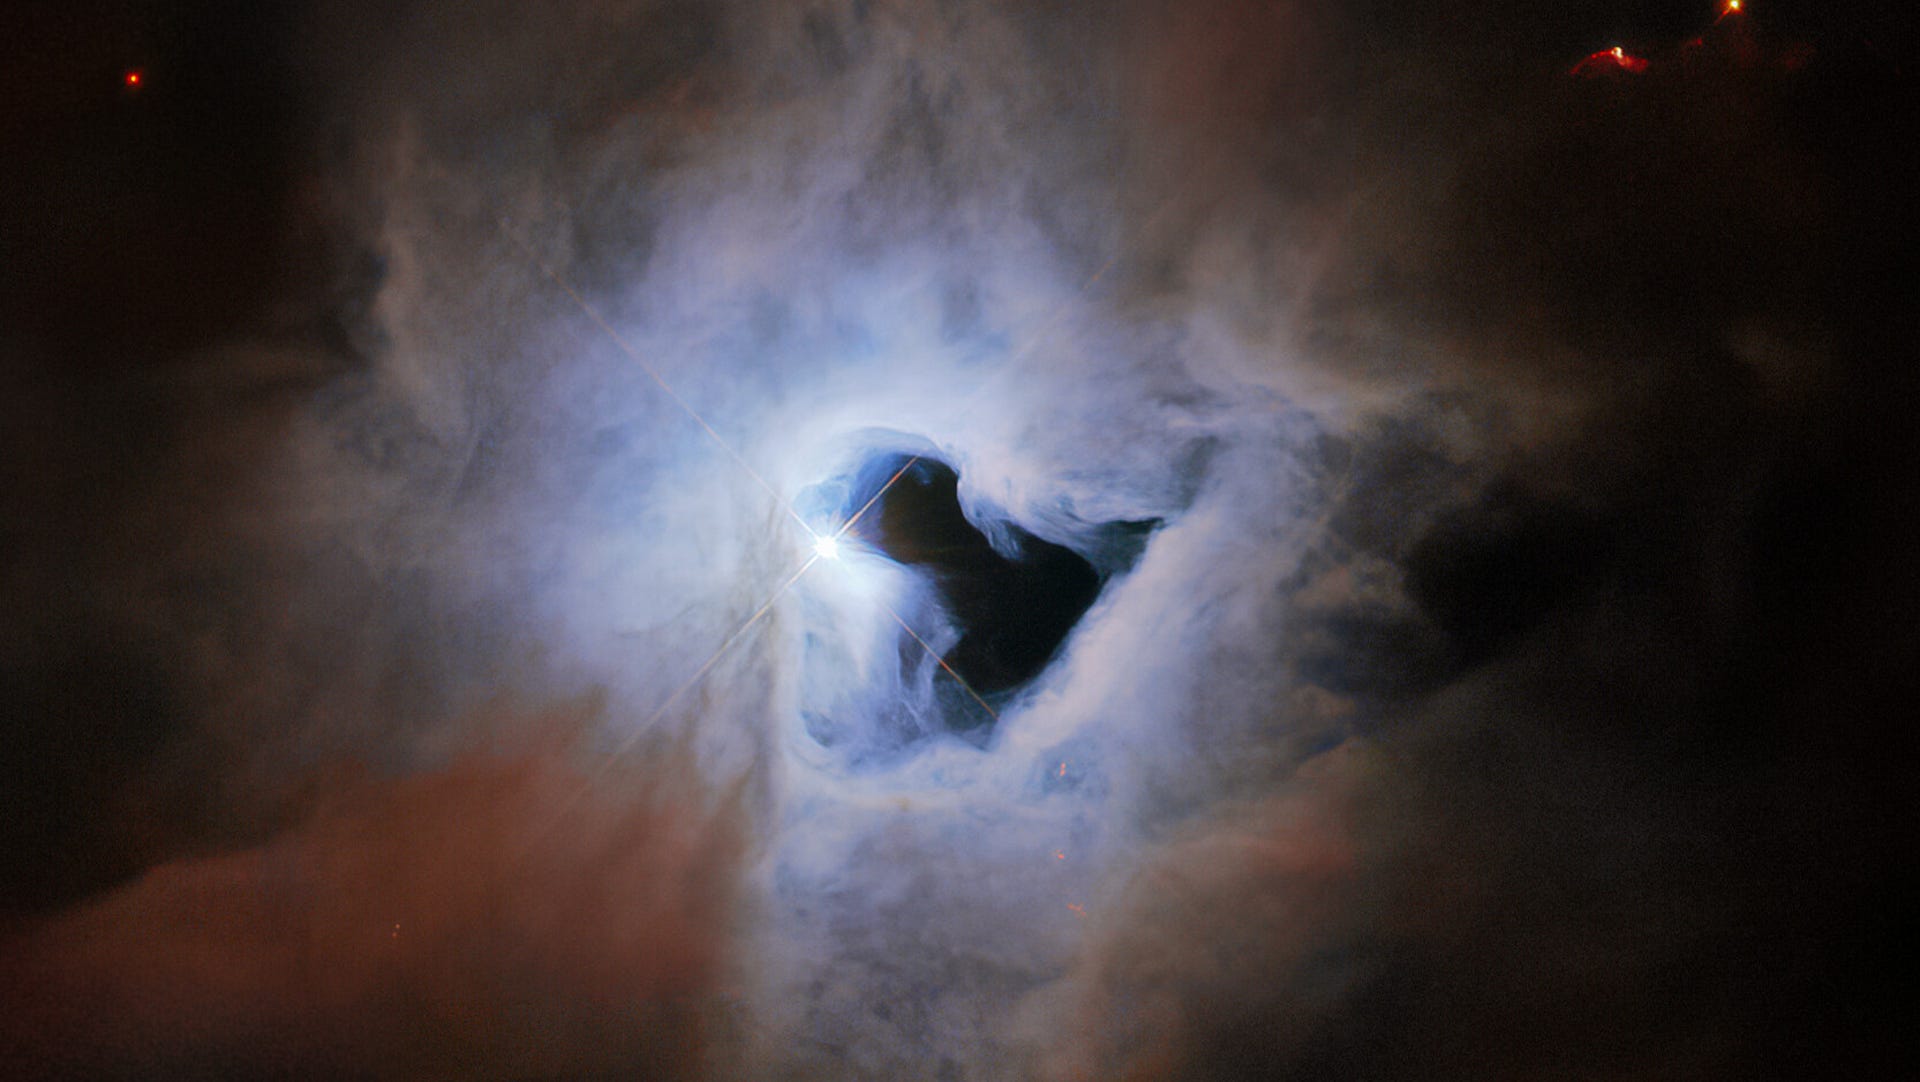 Ethereal view of a ghostly cloud with a dark, open spot in the center like a keyhole showing the dark of space behind.